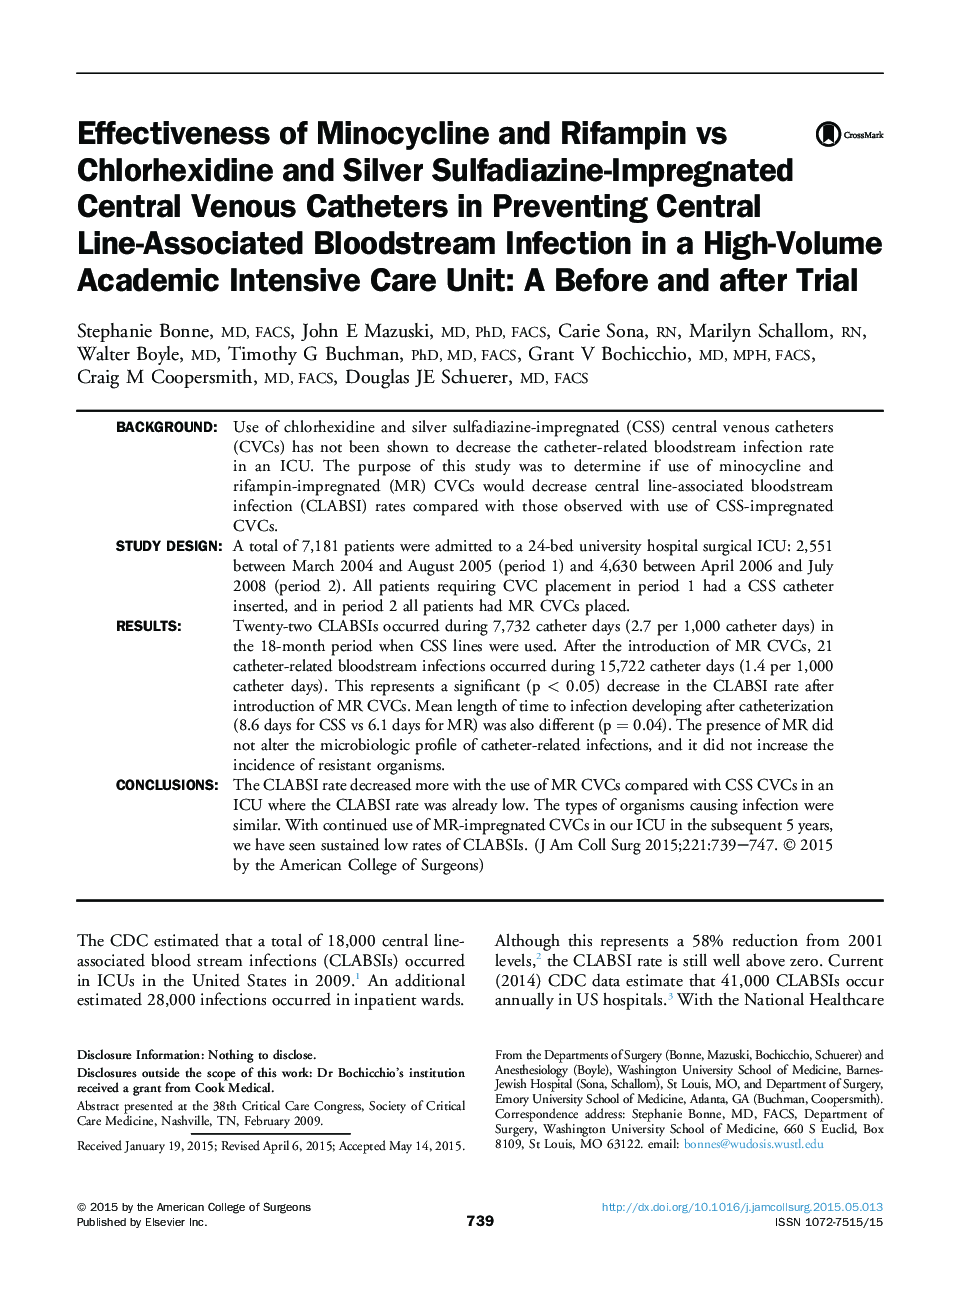 Effectiveness of Minocycline and Rifampin vs Chlorhexidine and Silver Sulfadiazine-Impregnated Central Venous Catheters in Preventing Central Line-Associated Bloodstream Infection in a High-Volume Academic Intensive Care Unit: A Before and after Trial 